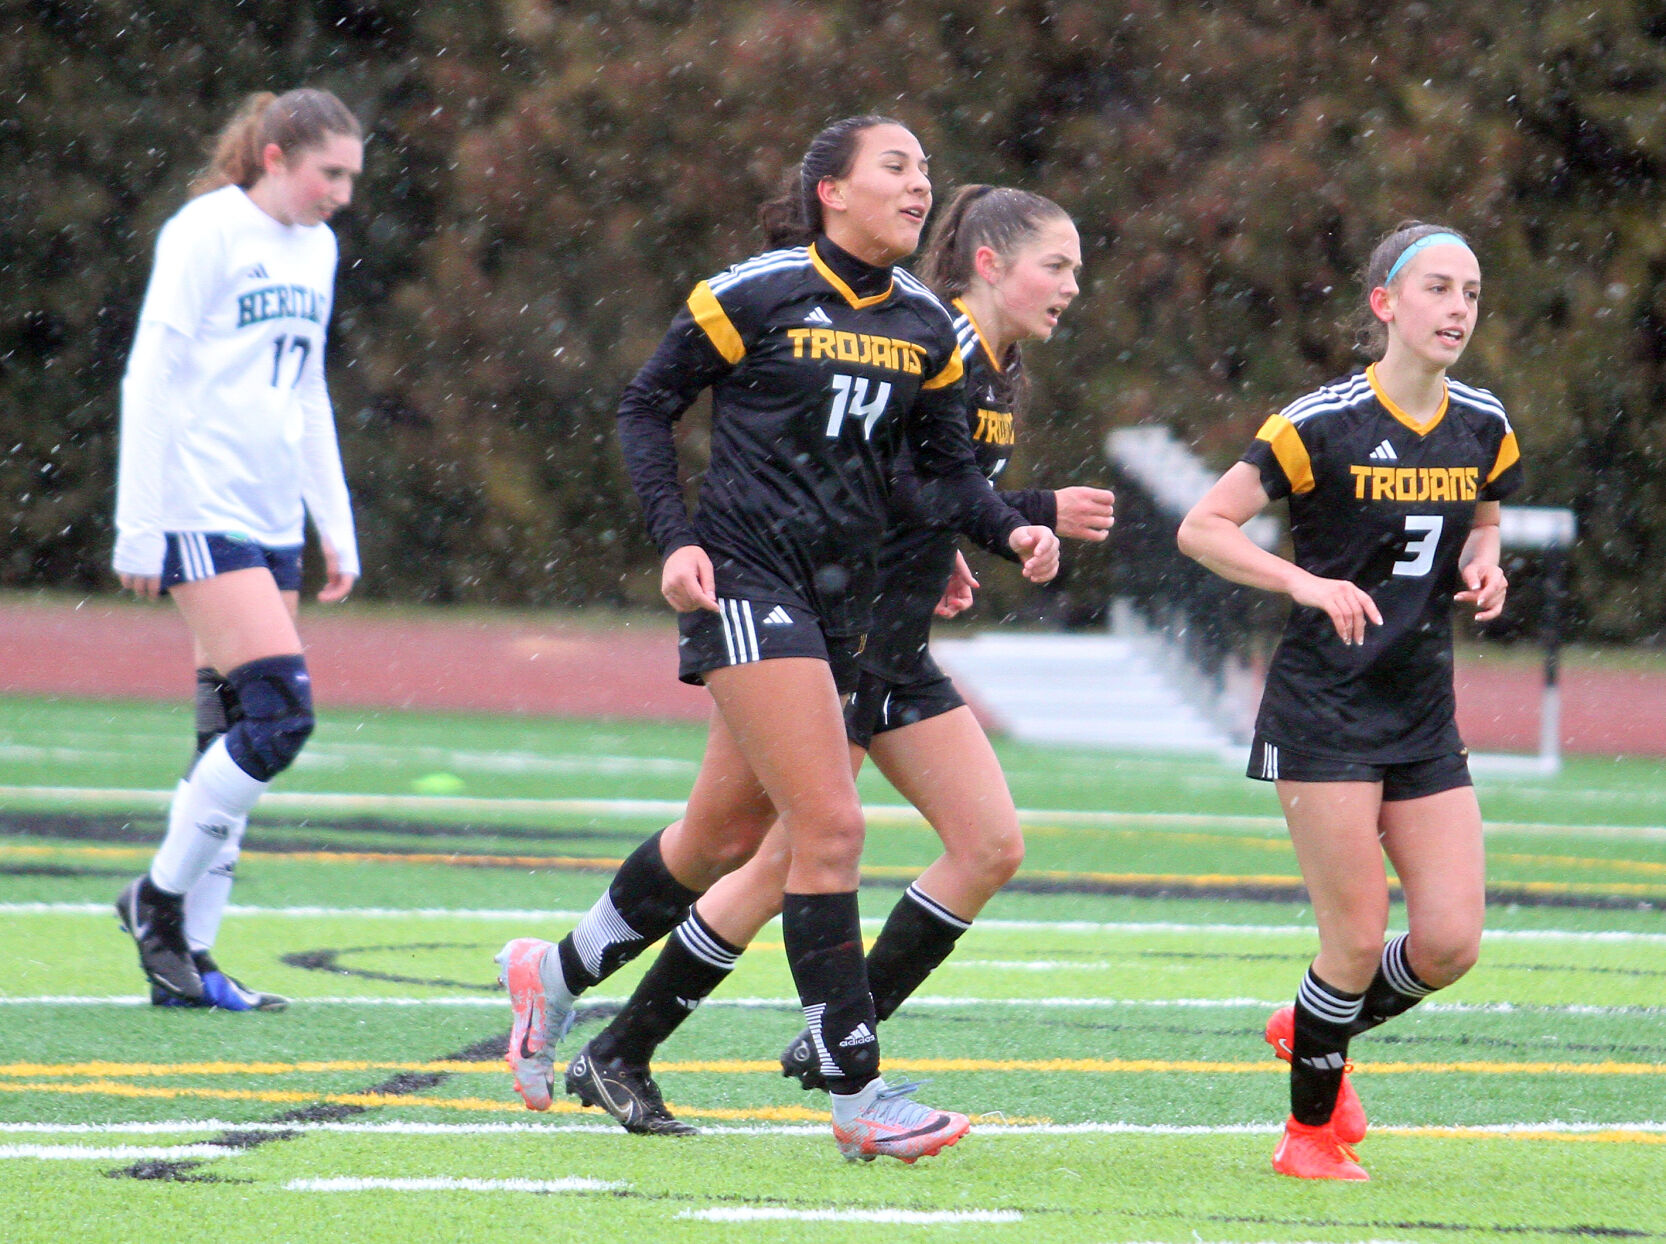 Prep roundup: TC Central blanks Heritage 6-0 in blustery conditions